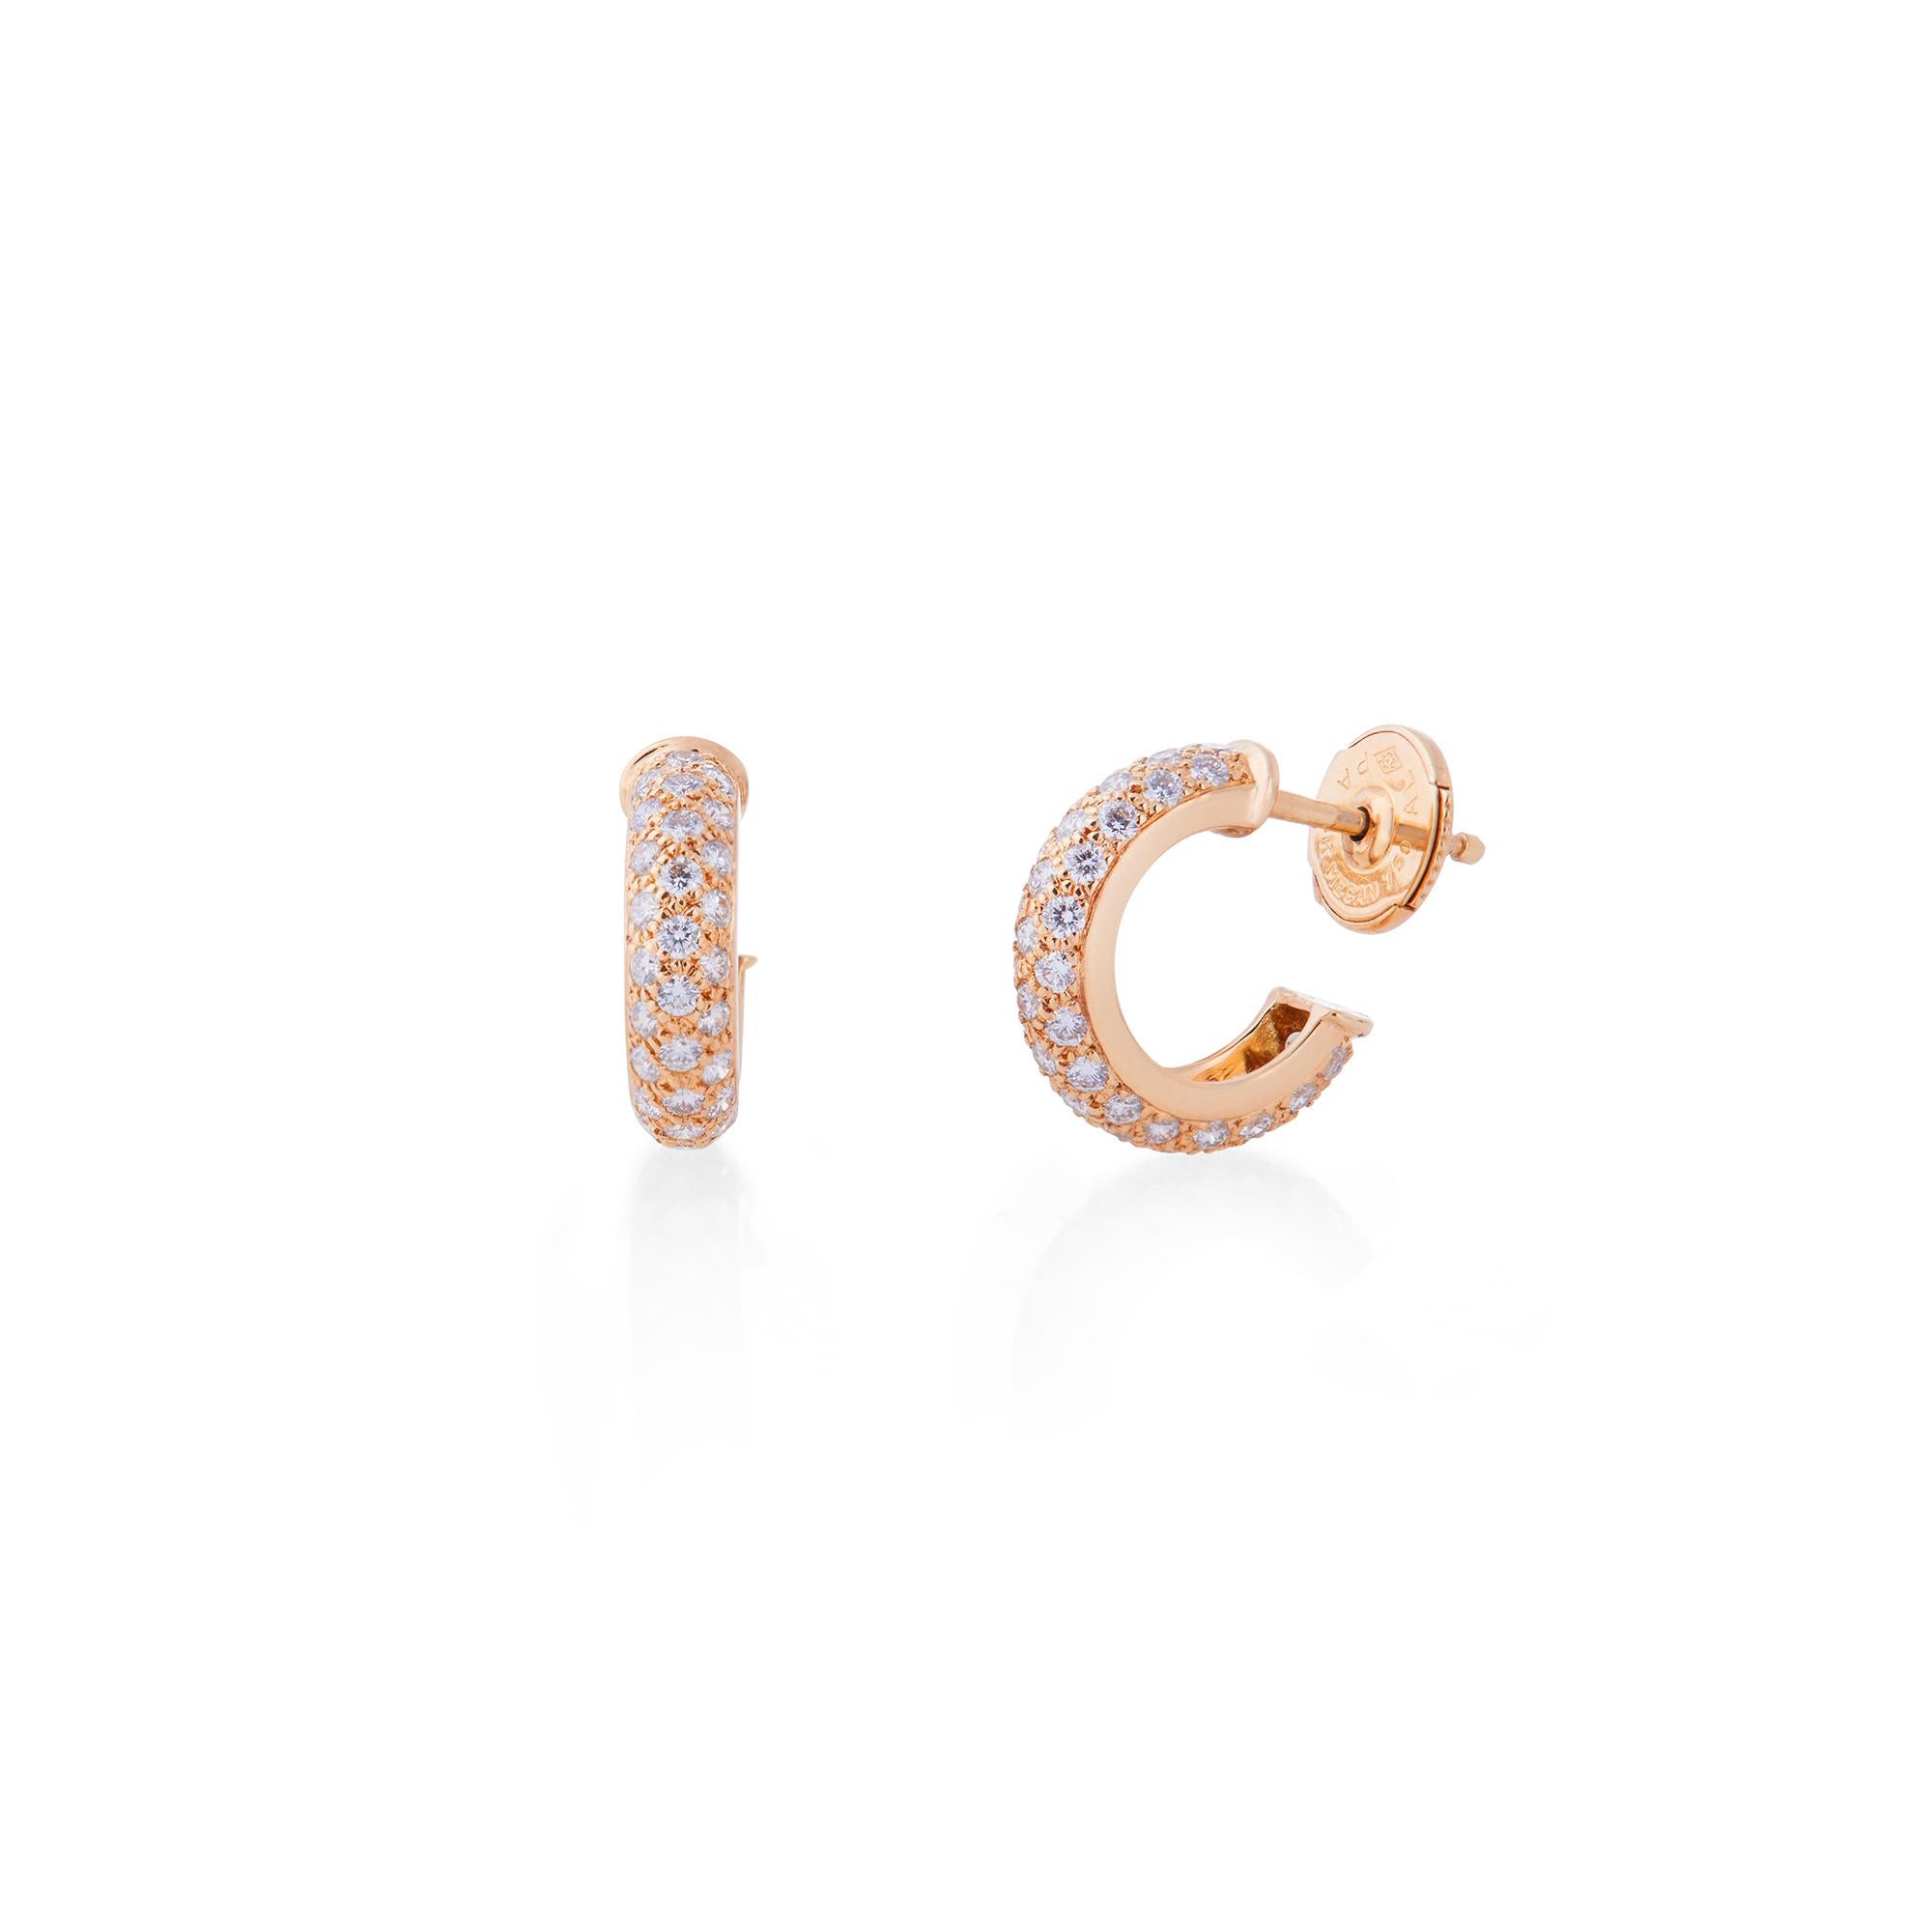 Authentic Cartier Étincelle de Cartier huggie hoop earrings crafted in 18 karat yellow gold and set with approximately 0.75 carats of high quality round cut diamonds.  The earrings measure .54 inches long and .15 inches wide.  Signed Cartier, 750,